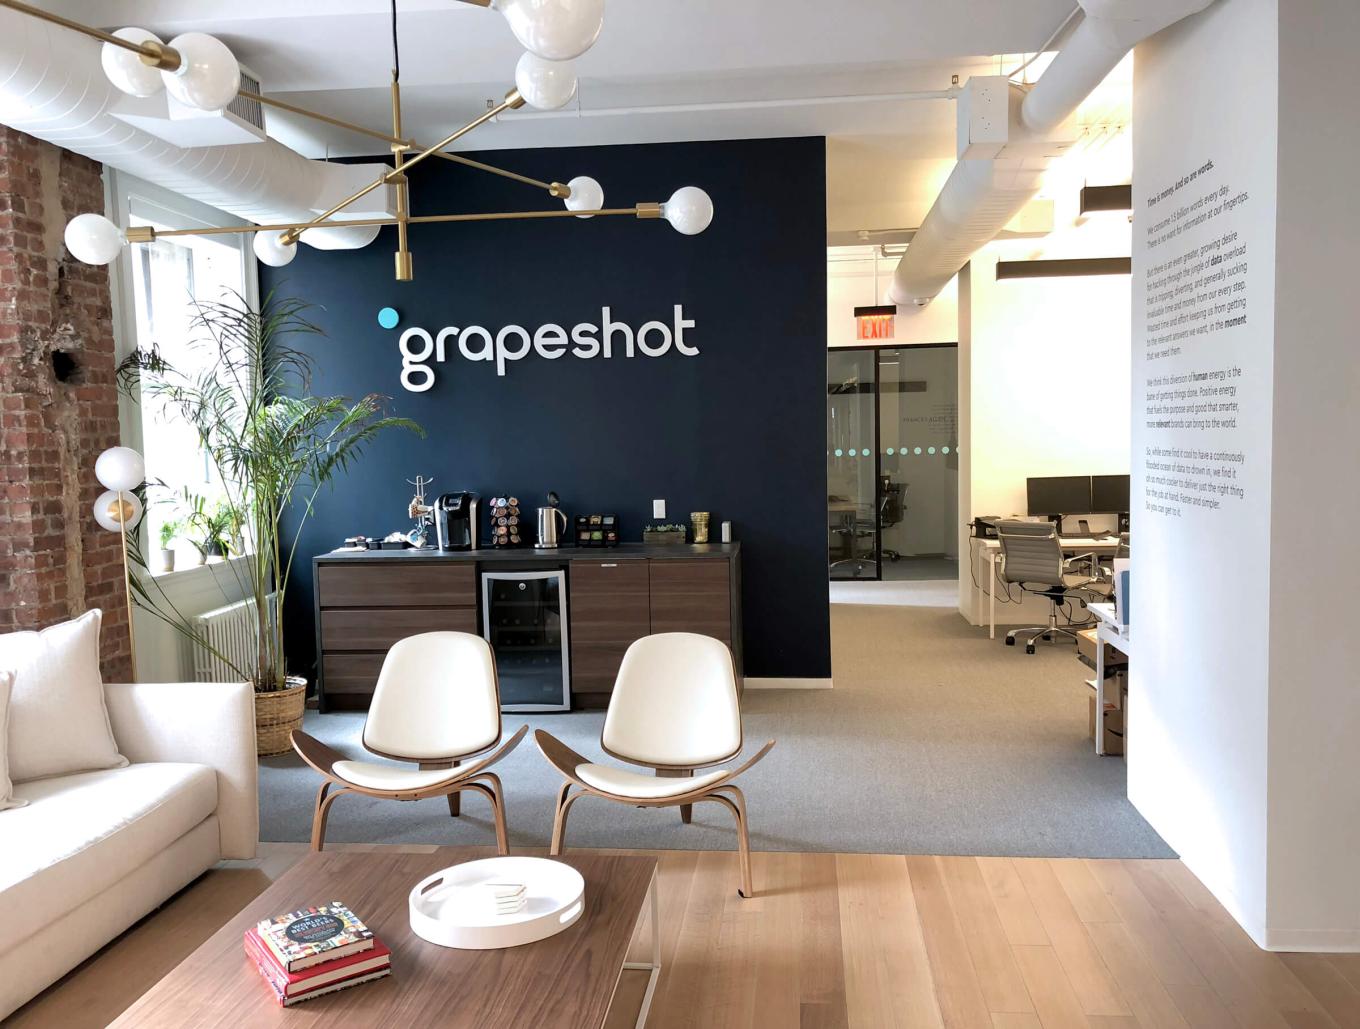 An office seating area with the Grapeshot logo on the wall and tea and coffee making facilities in the back